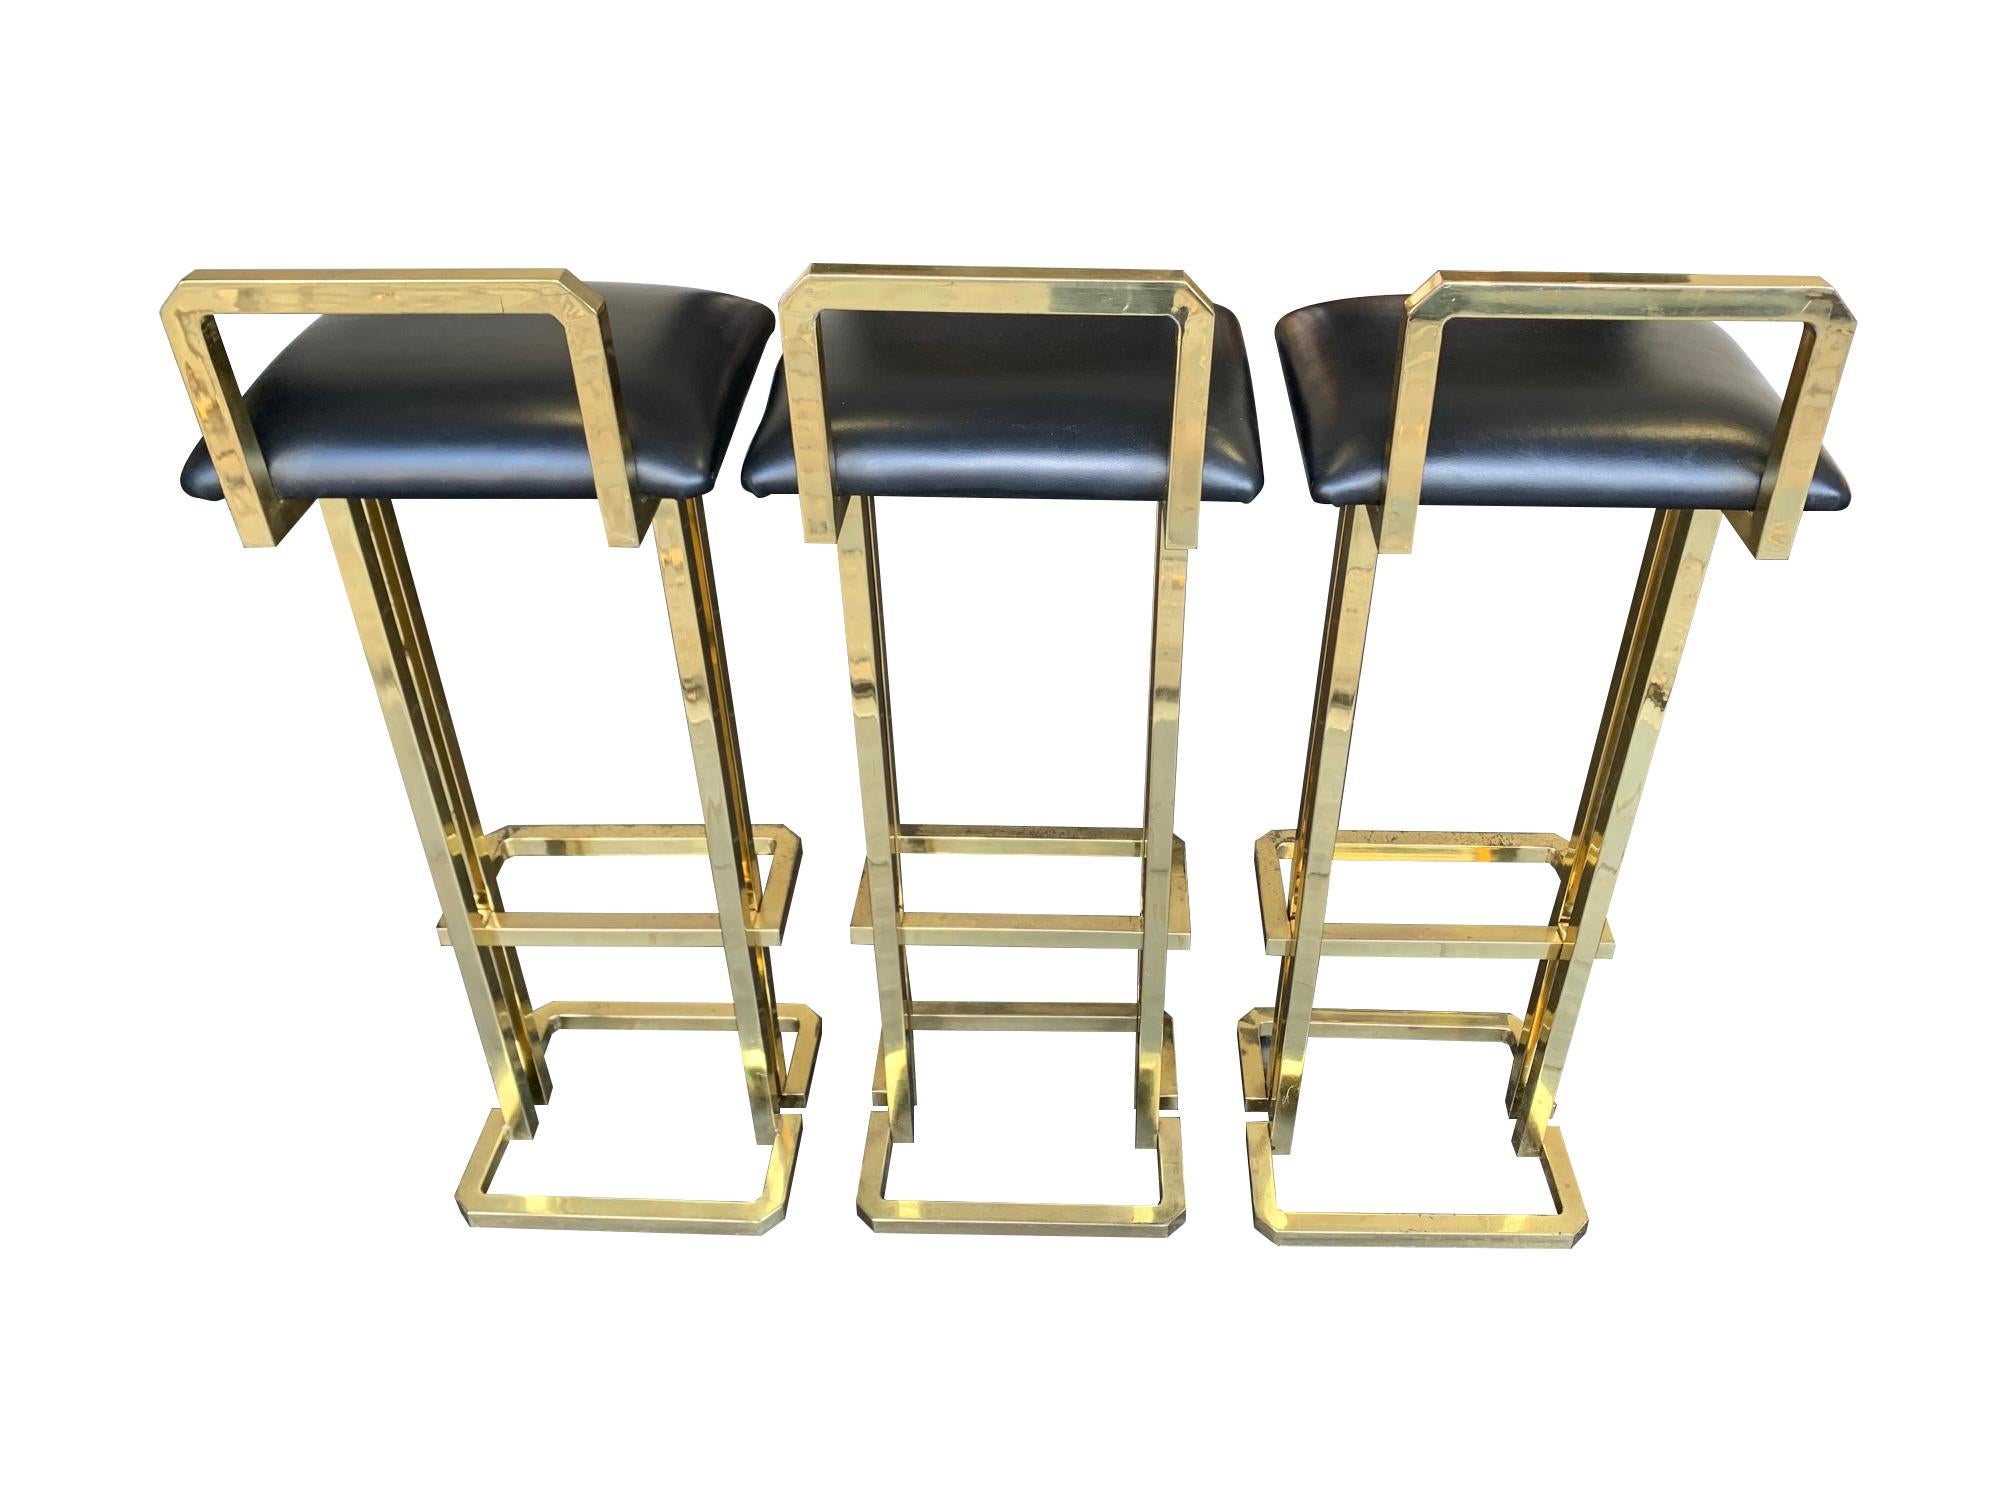 Set of 3 Maison Jansen Style Gilt Metal Stools with Black Leather Seat Pads For Sale 9